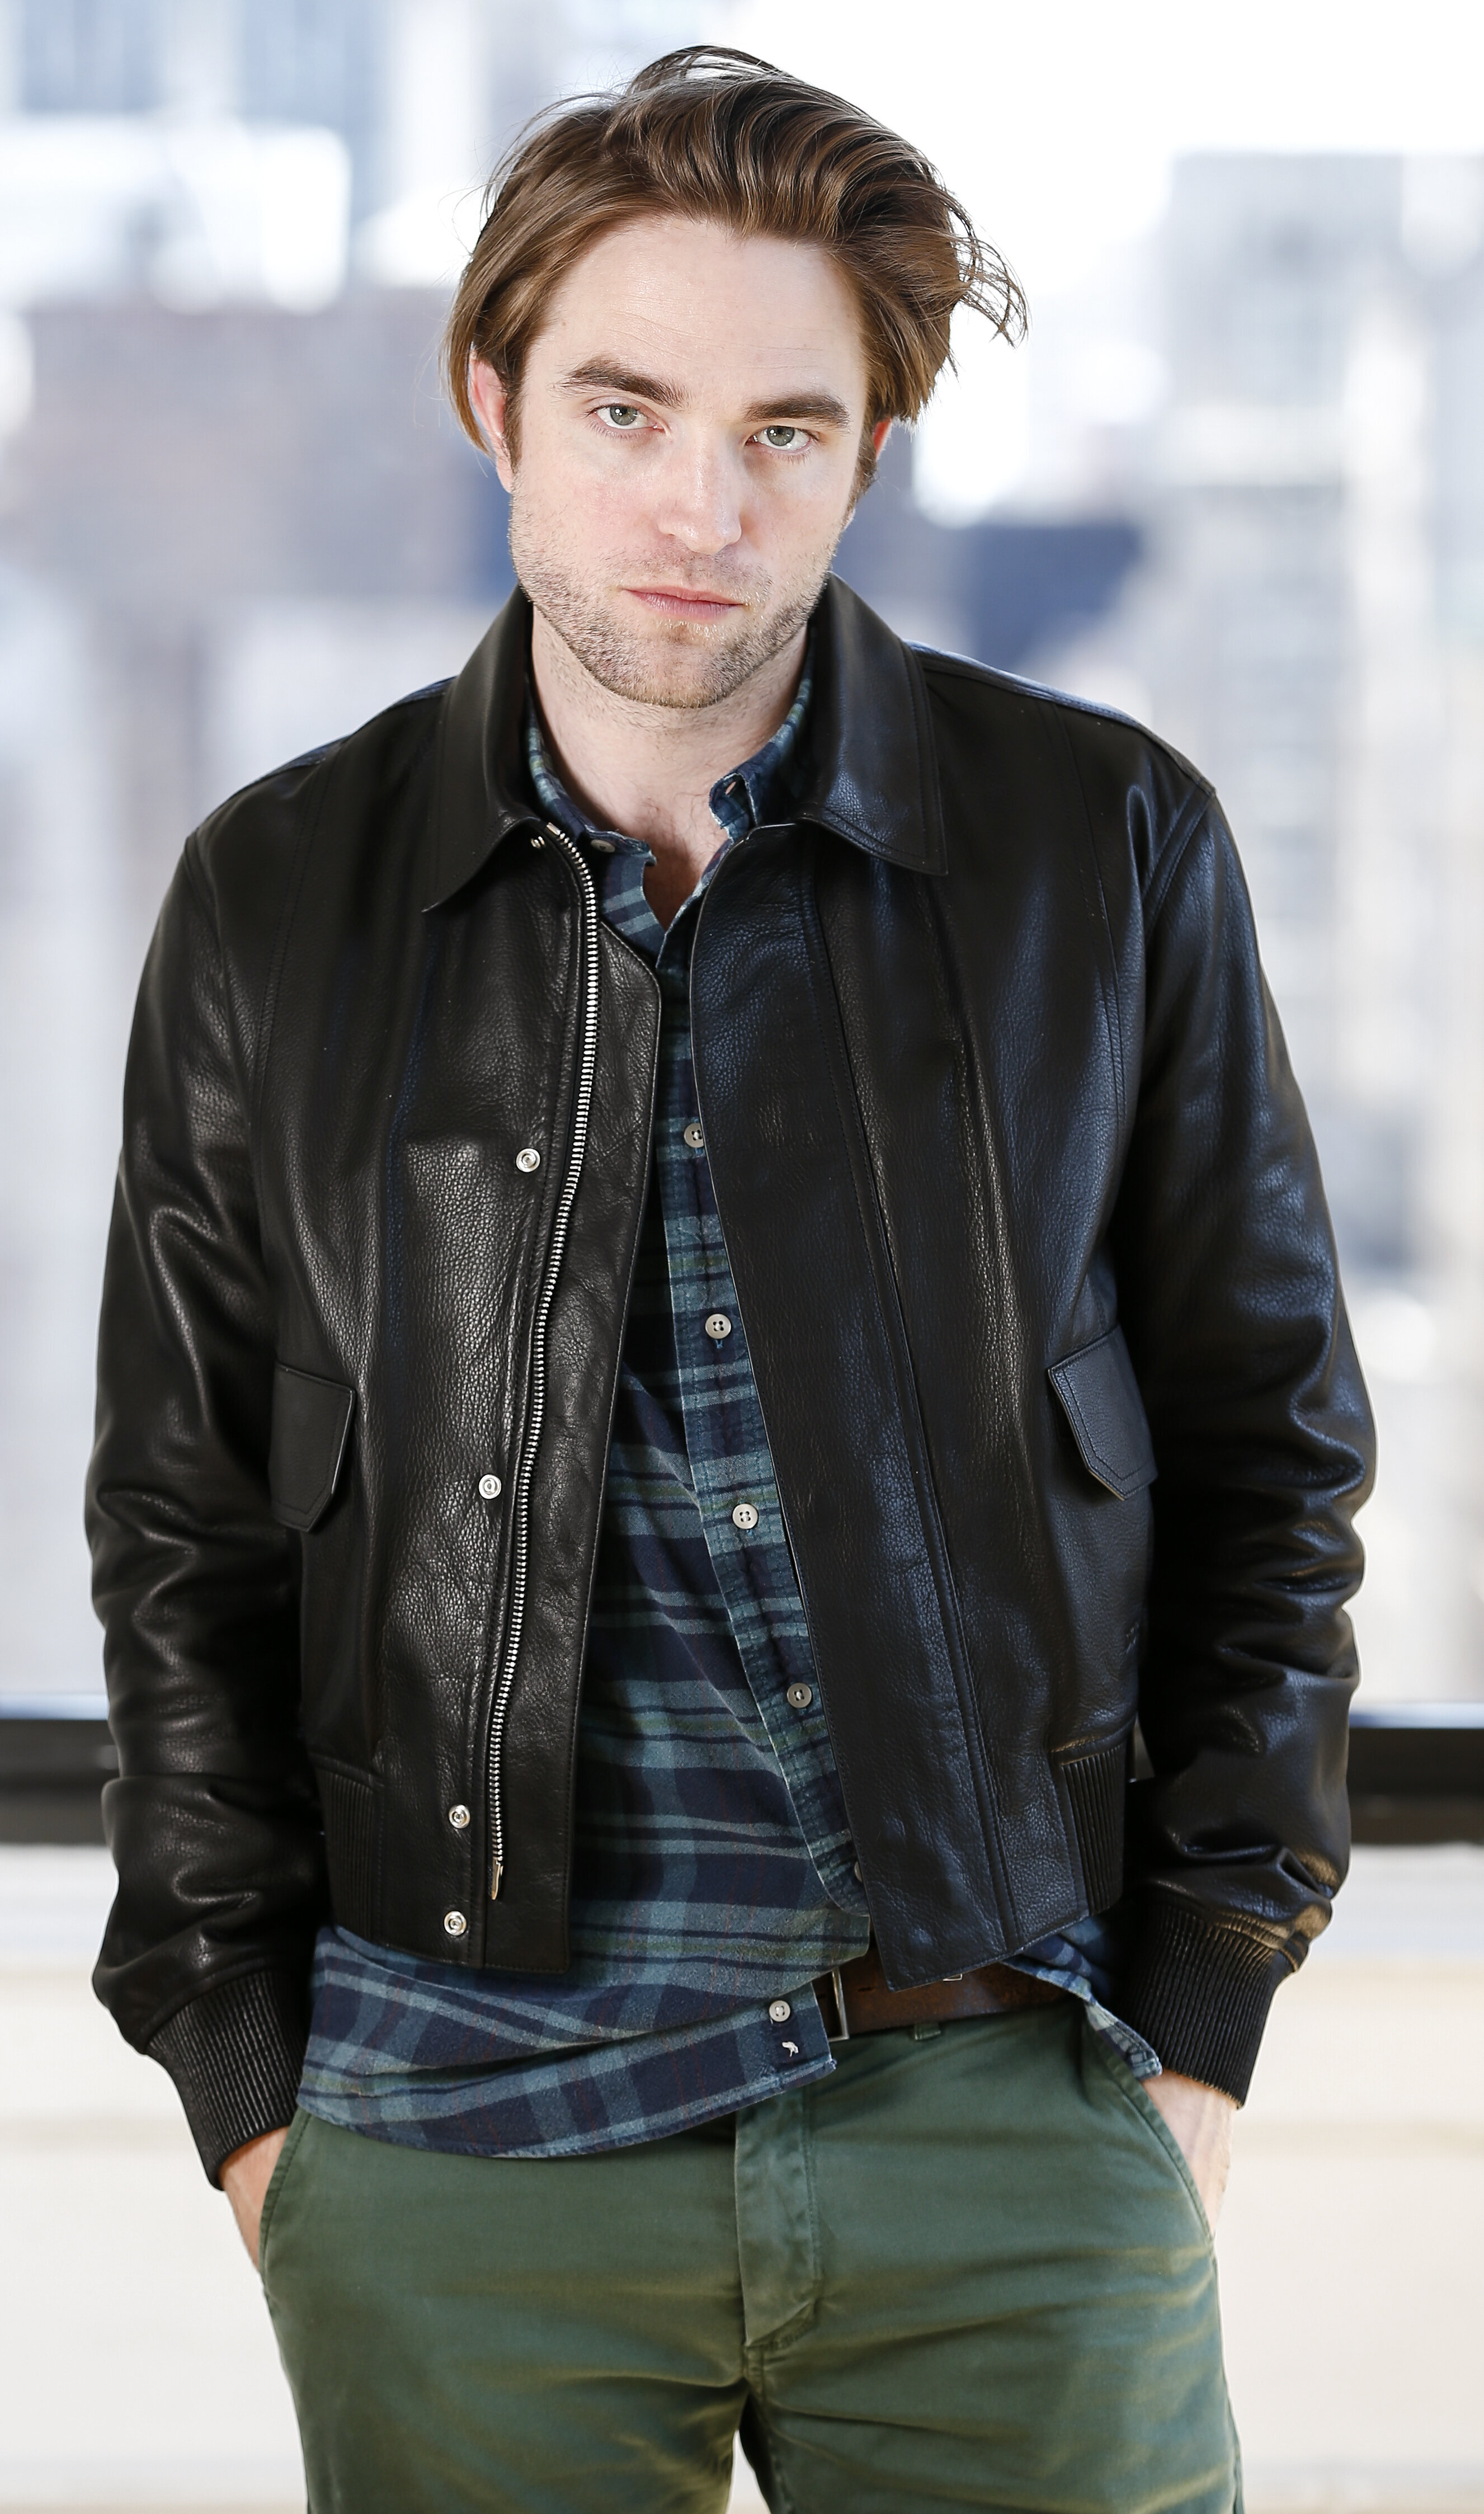 Robert Pattinson With His Hand in His Hair  Pictures  POPSUGAR Celebrity